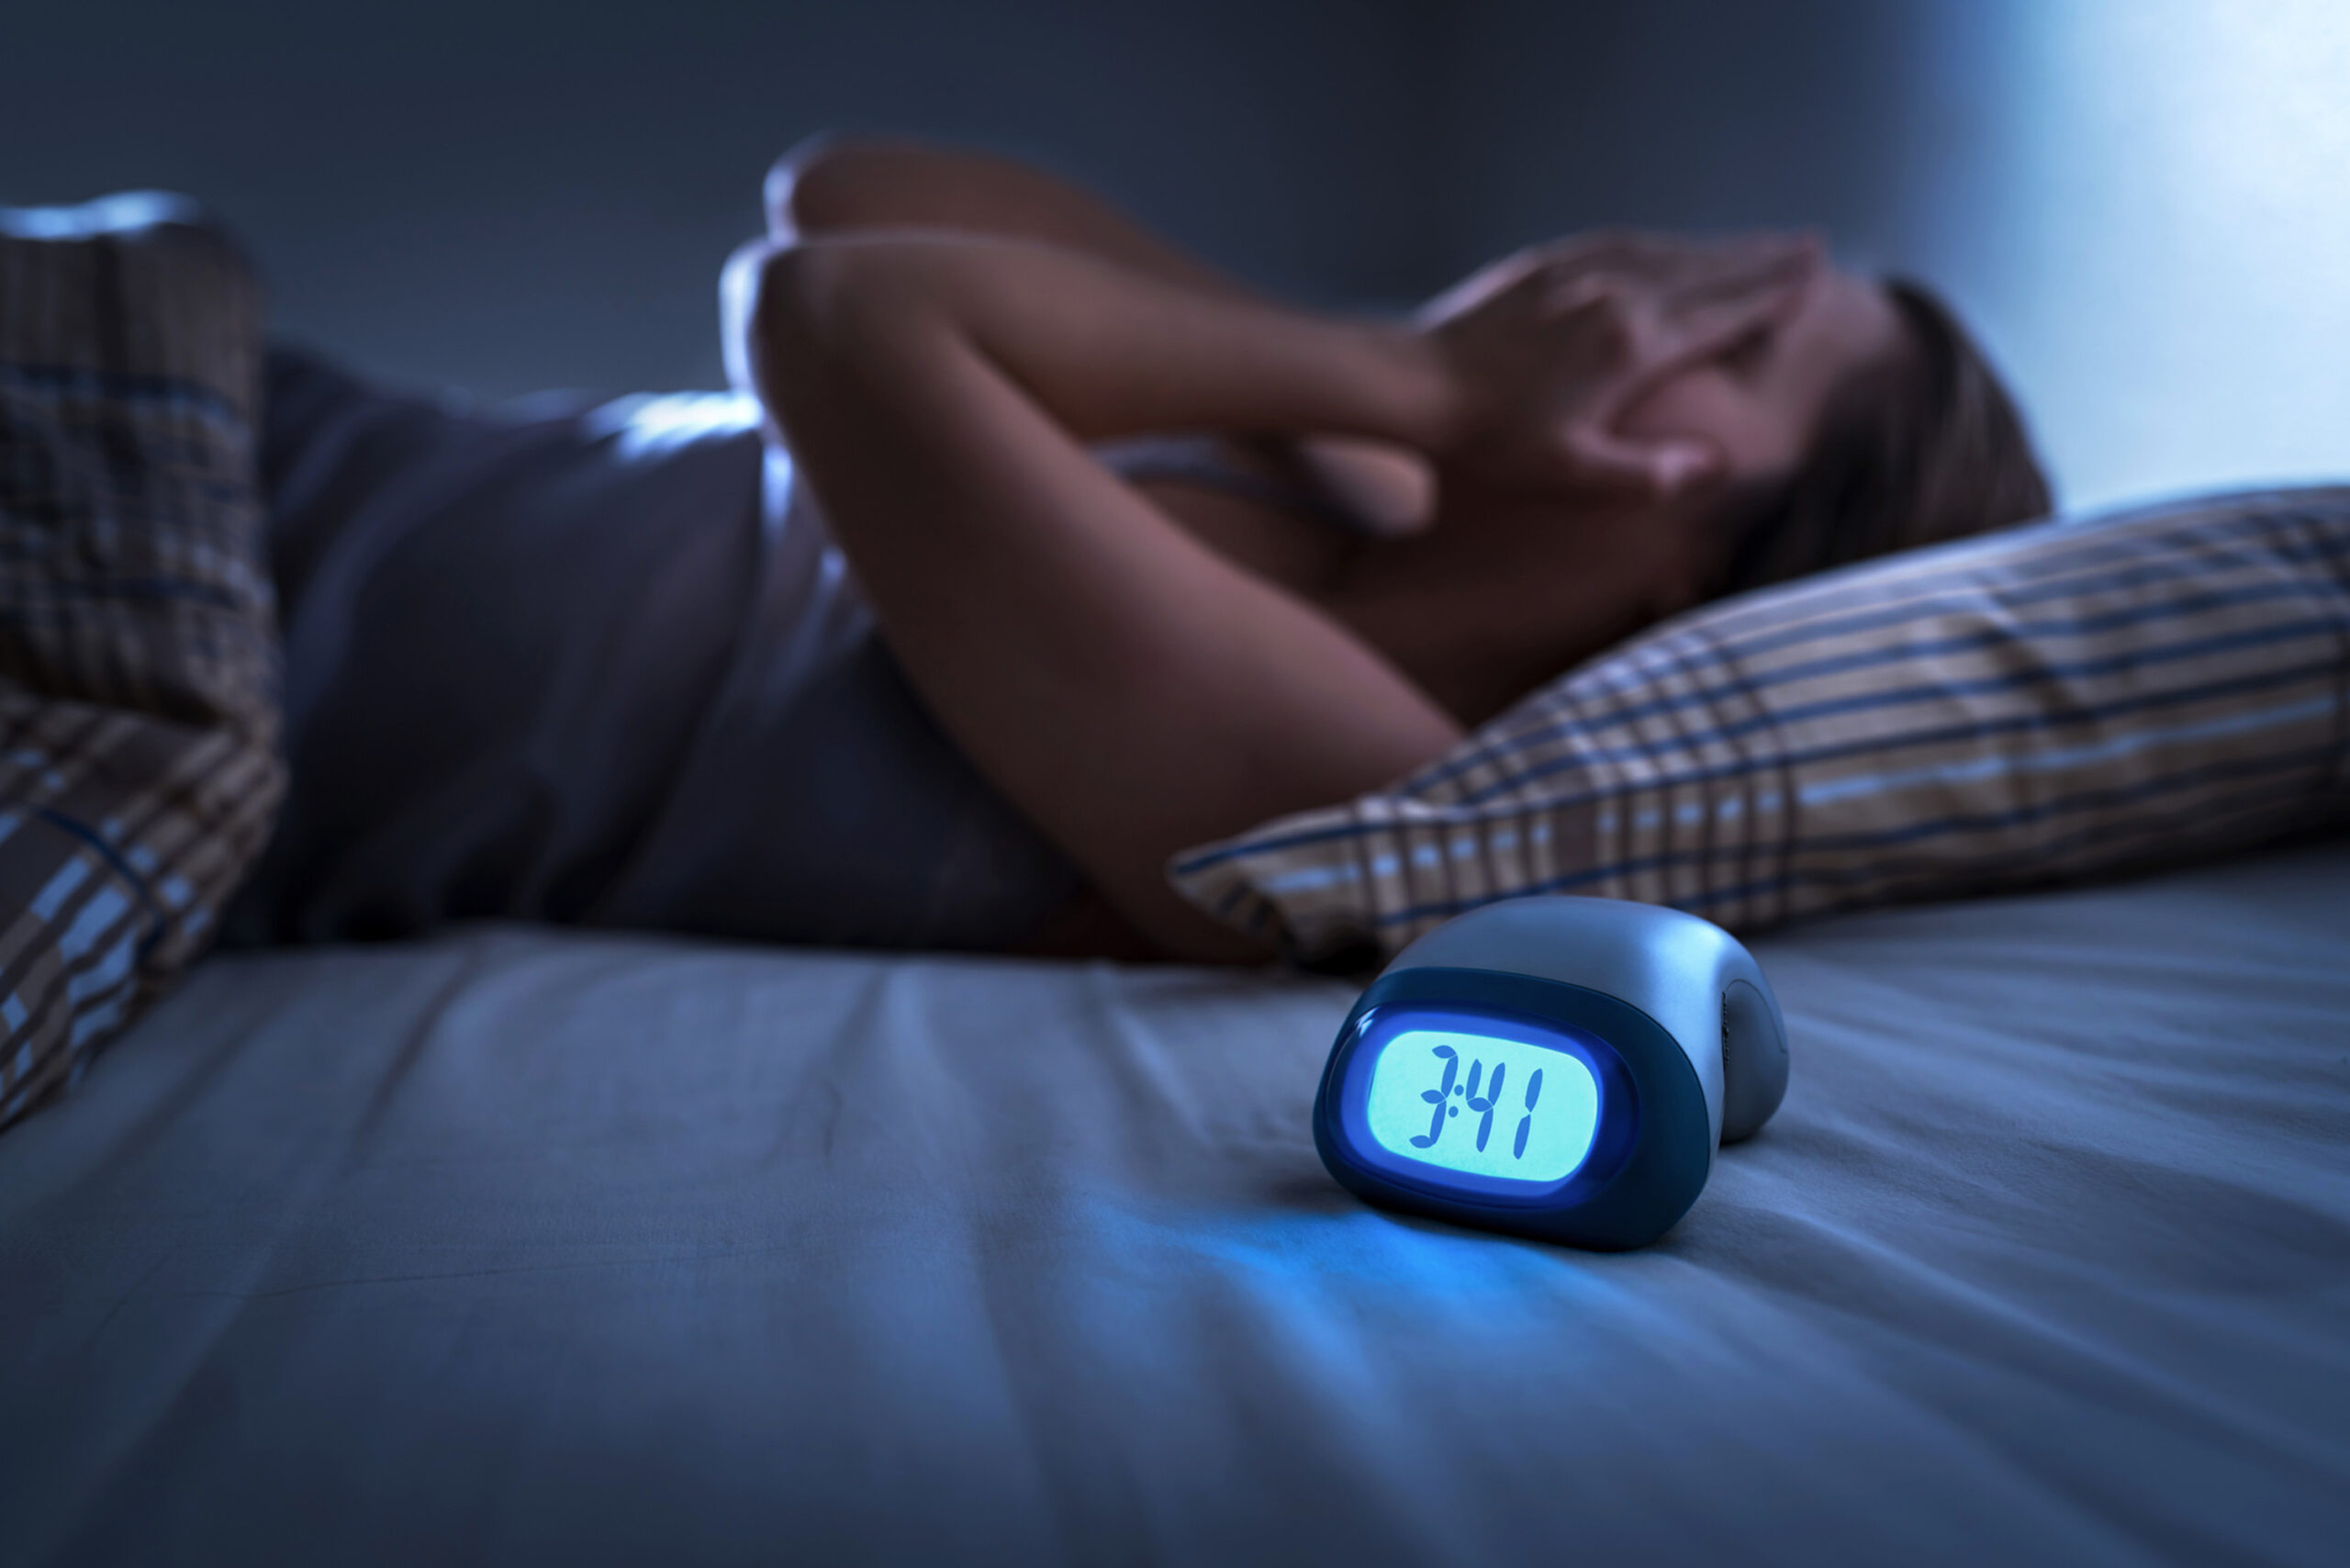 A blue digital clock displays the time 3:41 on a bed with a blurry image of a woman laying supine with her hands to her face.